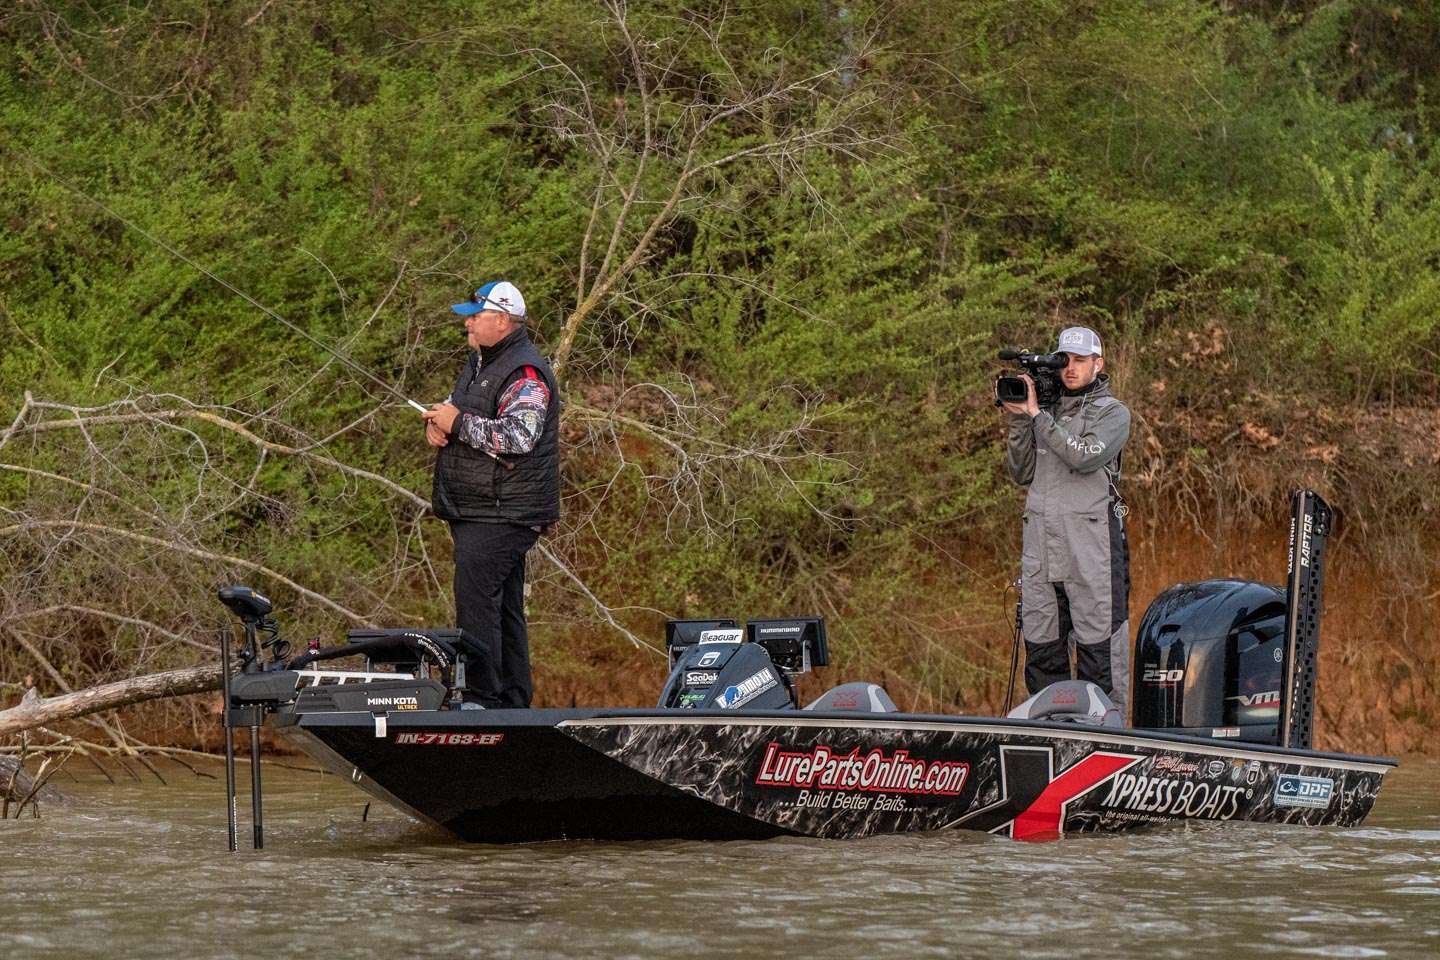 Find out if Indiana pro and original Bassmaster Elite Series angler Bill Lowen landed his first Elite win at the Guaranteed Rate Bassmaster Elite at Pickwick Lake.